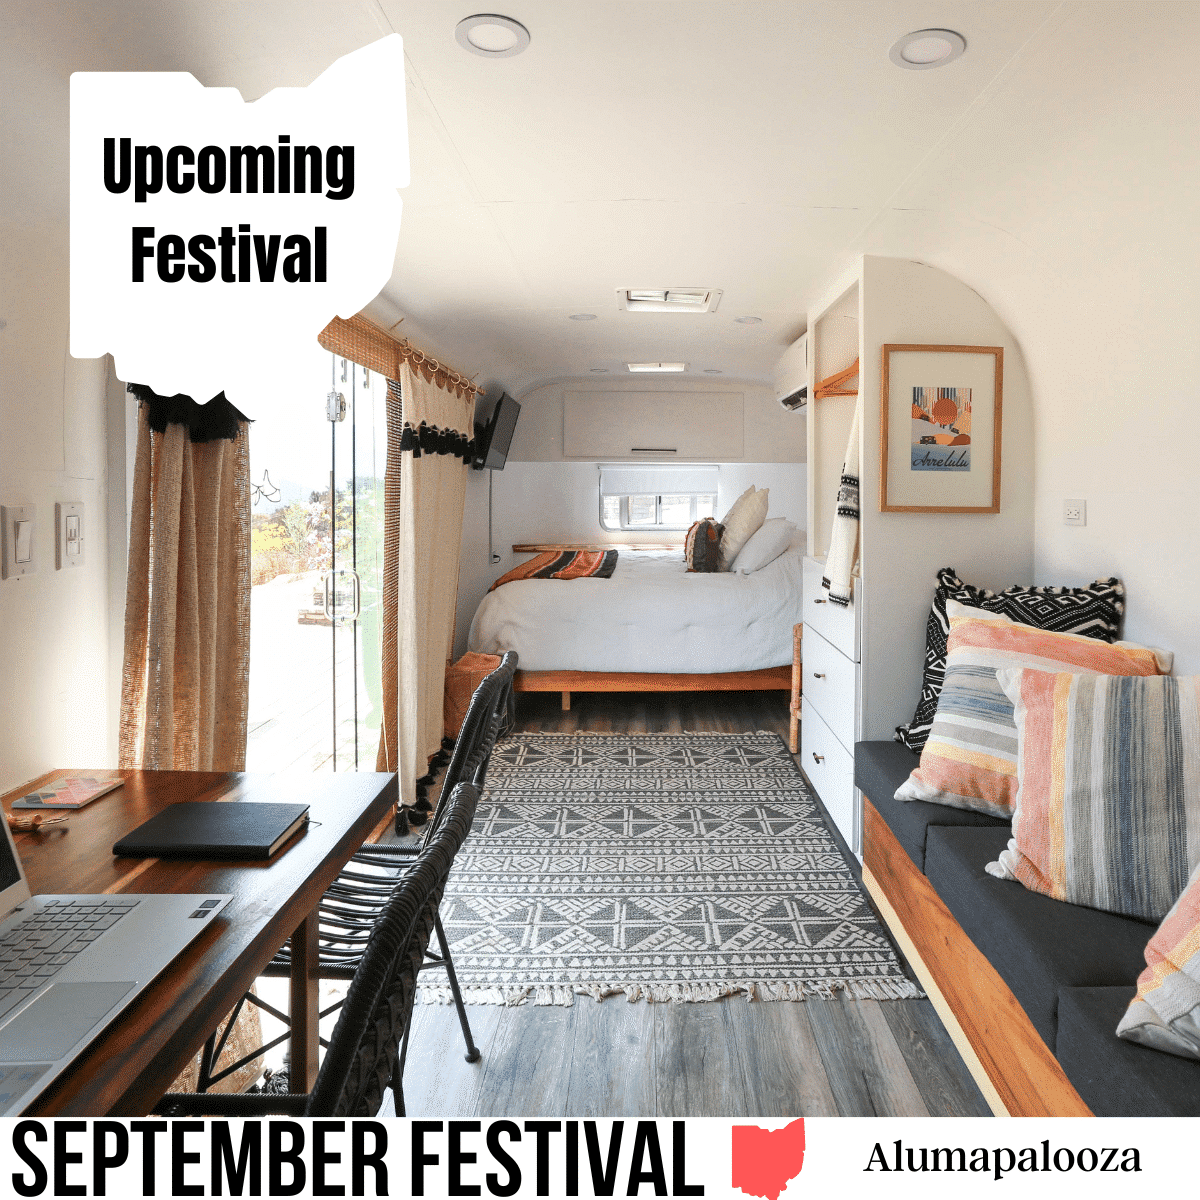 square image with a photo of the inside of an Airstream trailer with a dining table and chairs, a sofa with cushions and a double bed. A white strip at the bottom has the text September Festival Alumapalooza. Image via Canva pro license